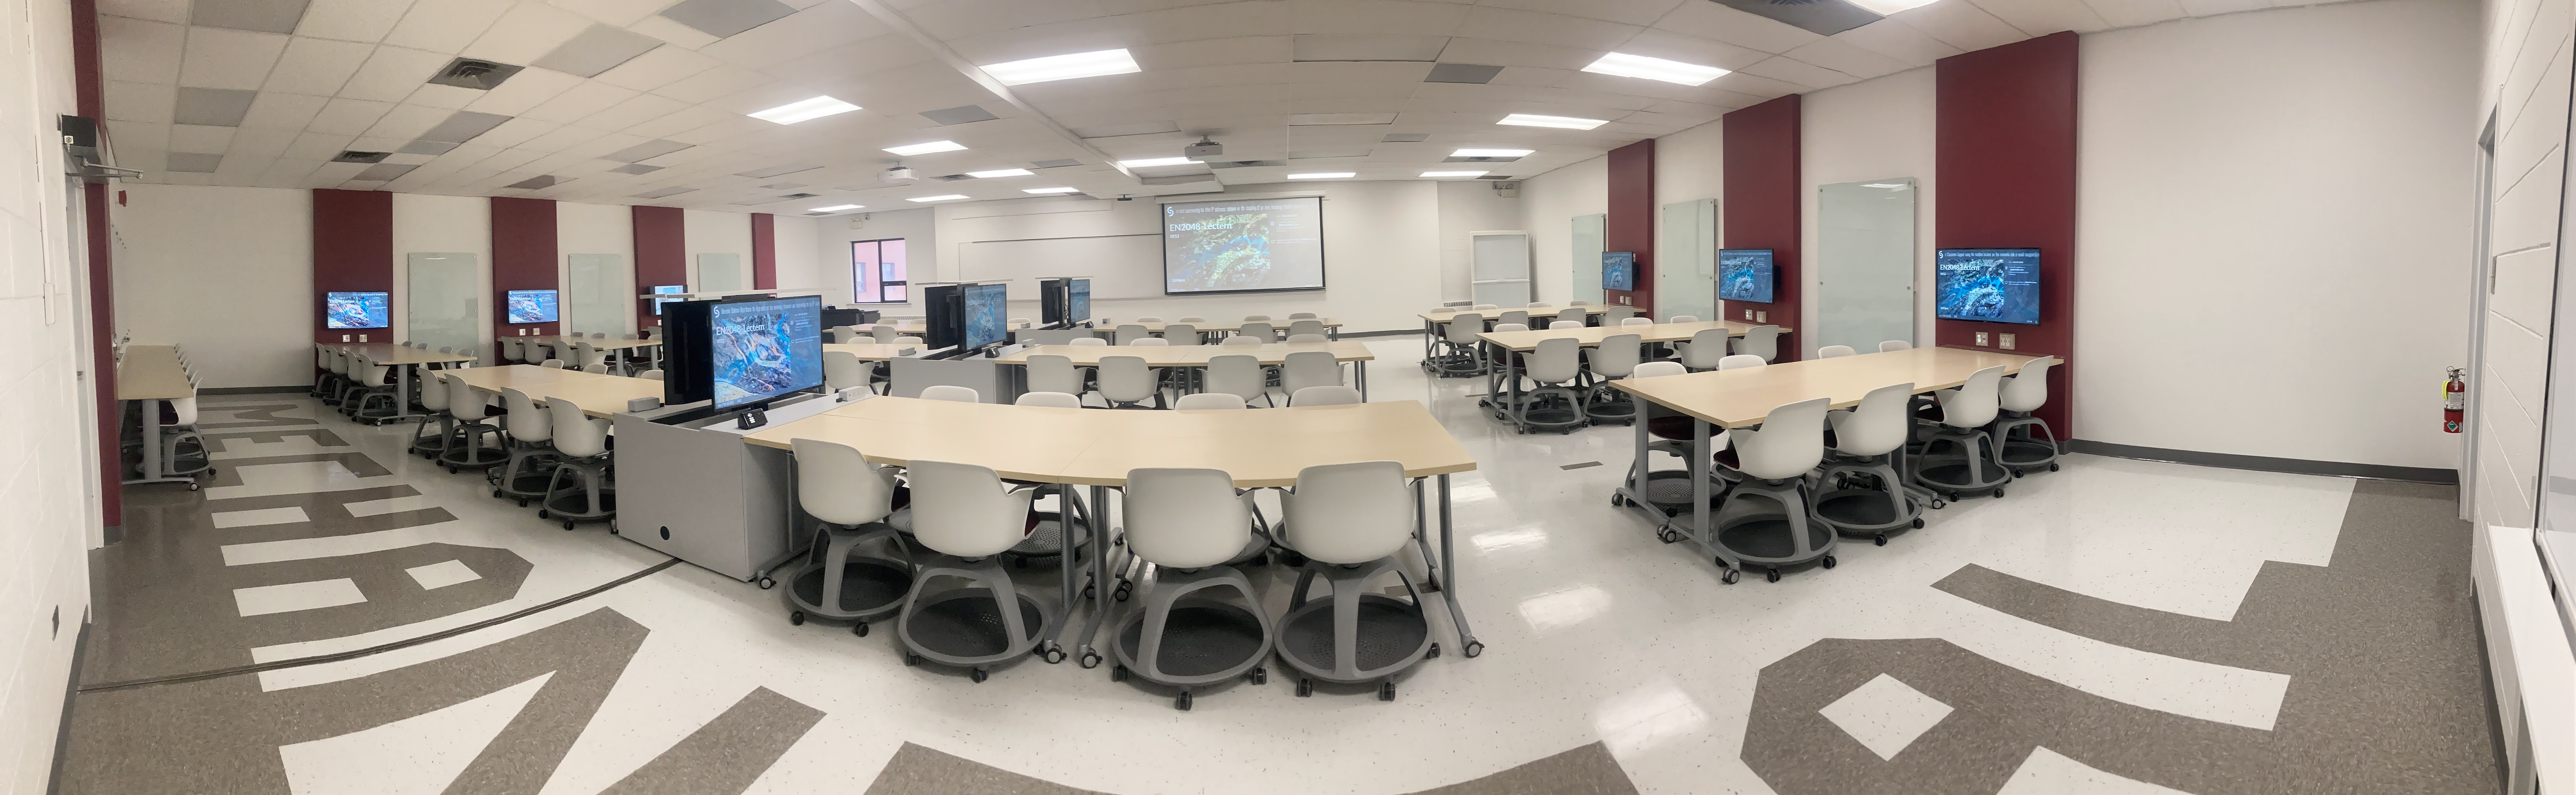 Newly renovated active classroom showing flexible tables and chairs that can move around.